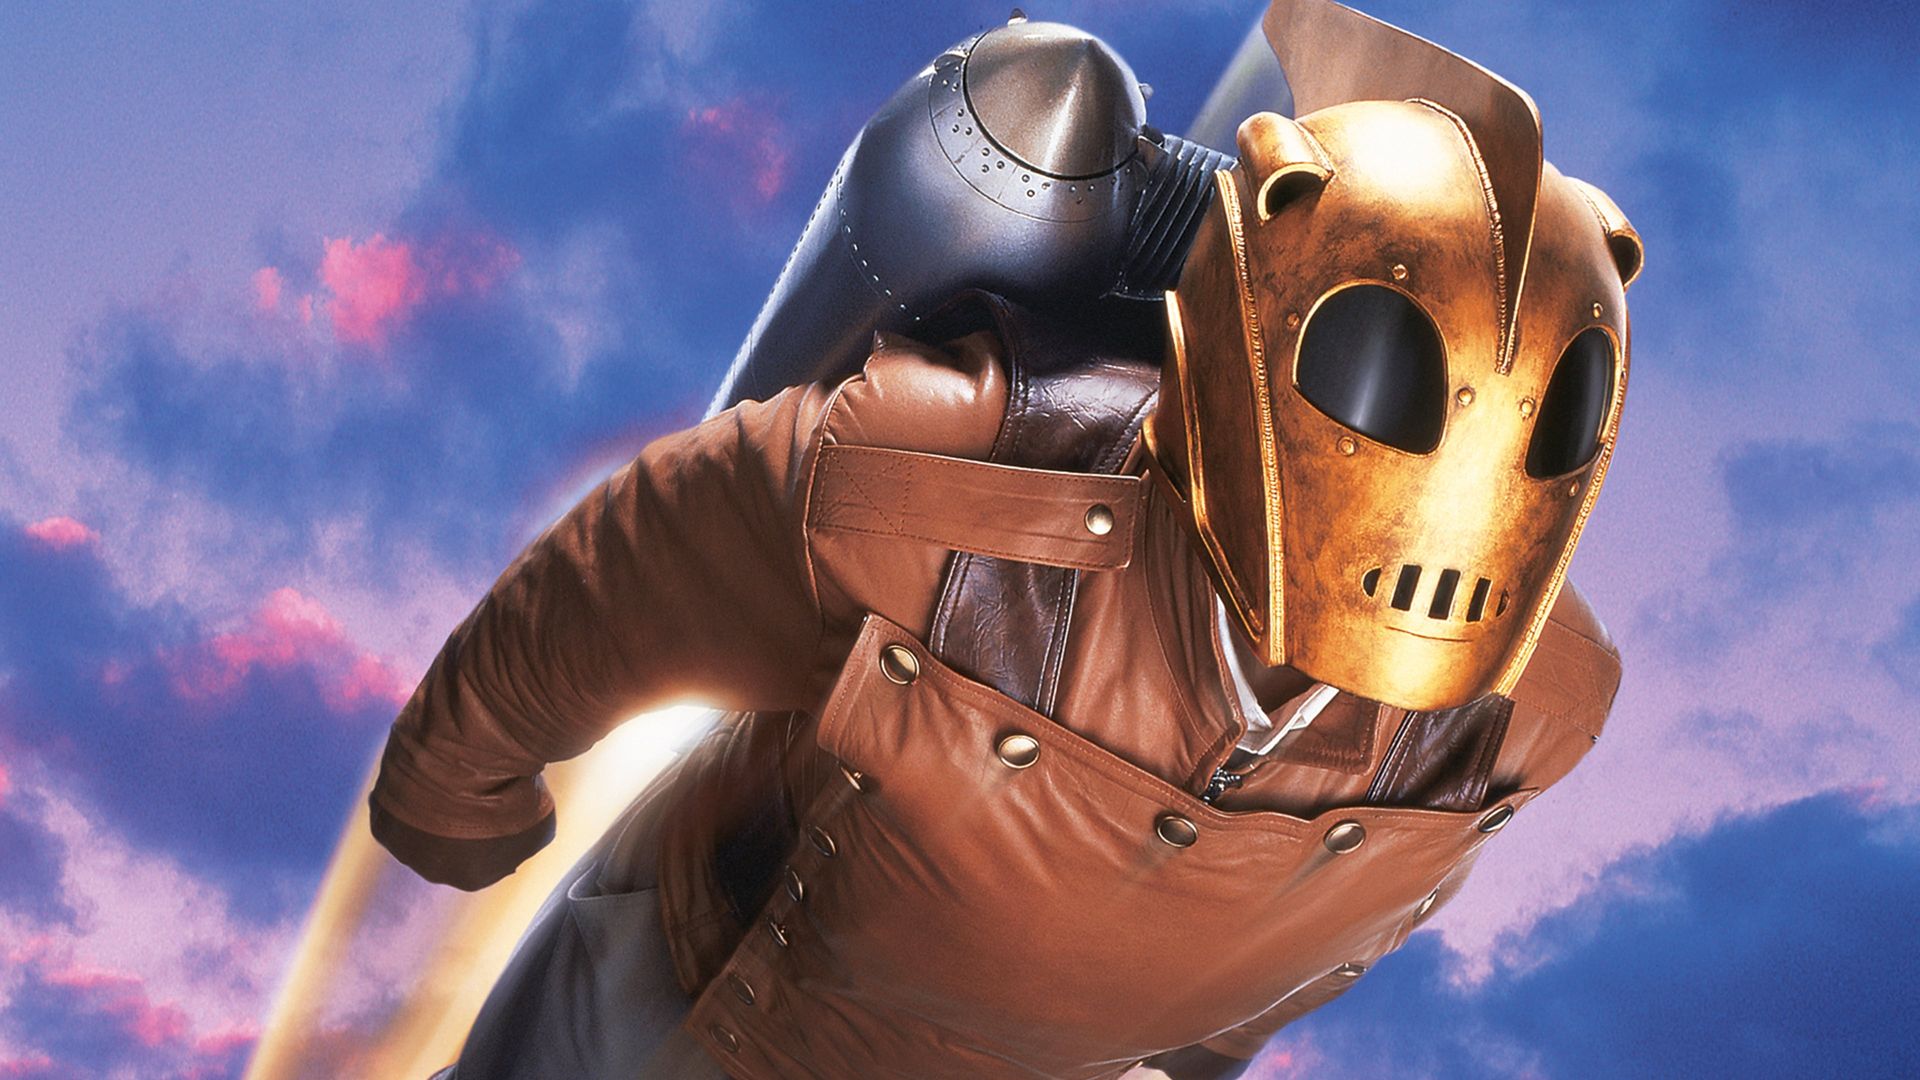 The Rocketeer Backdrop